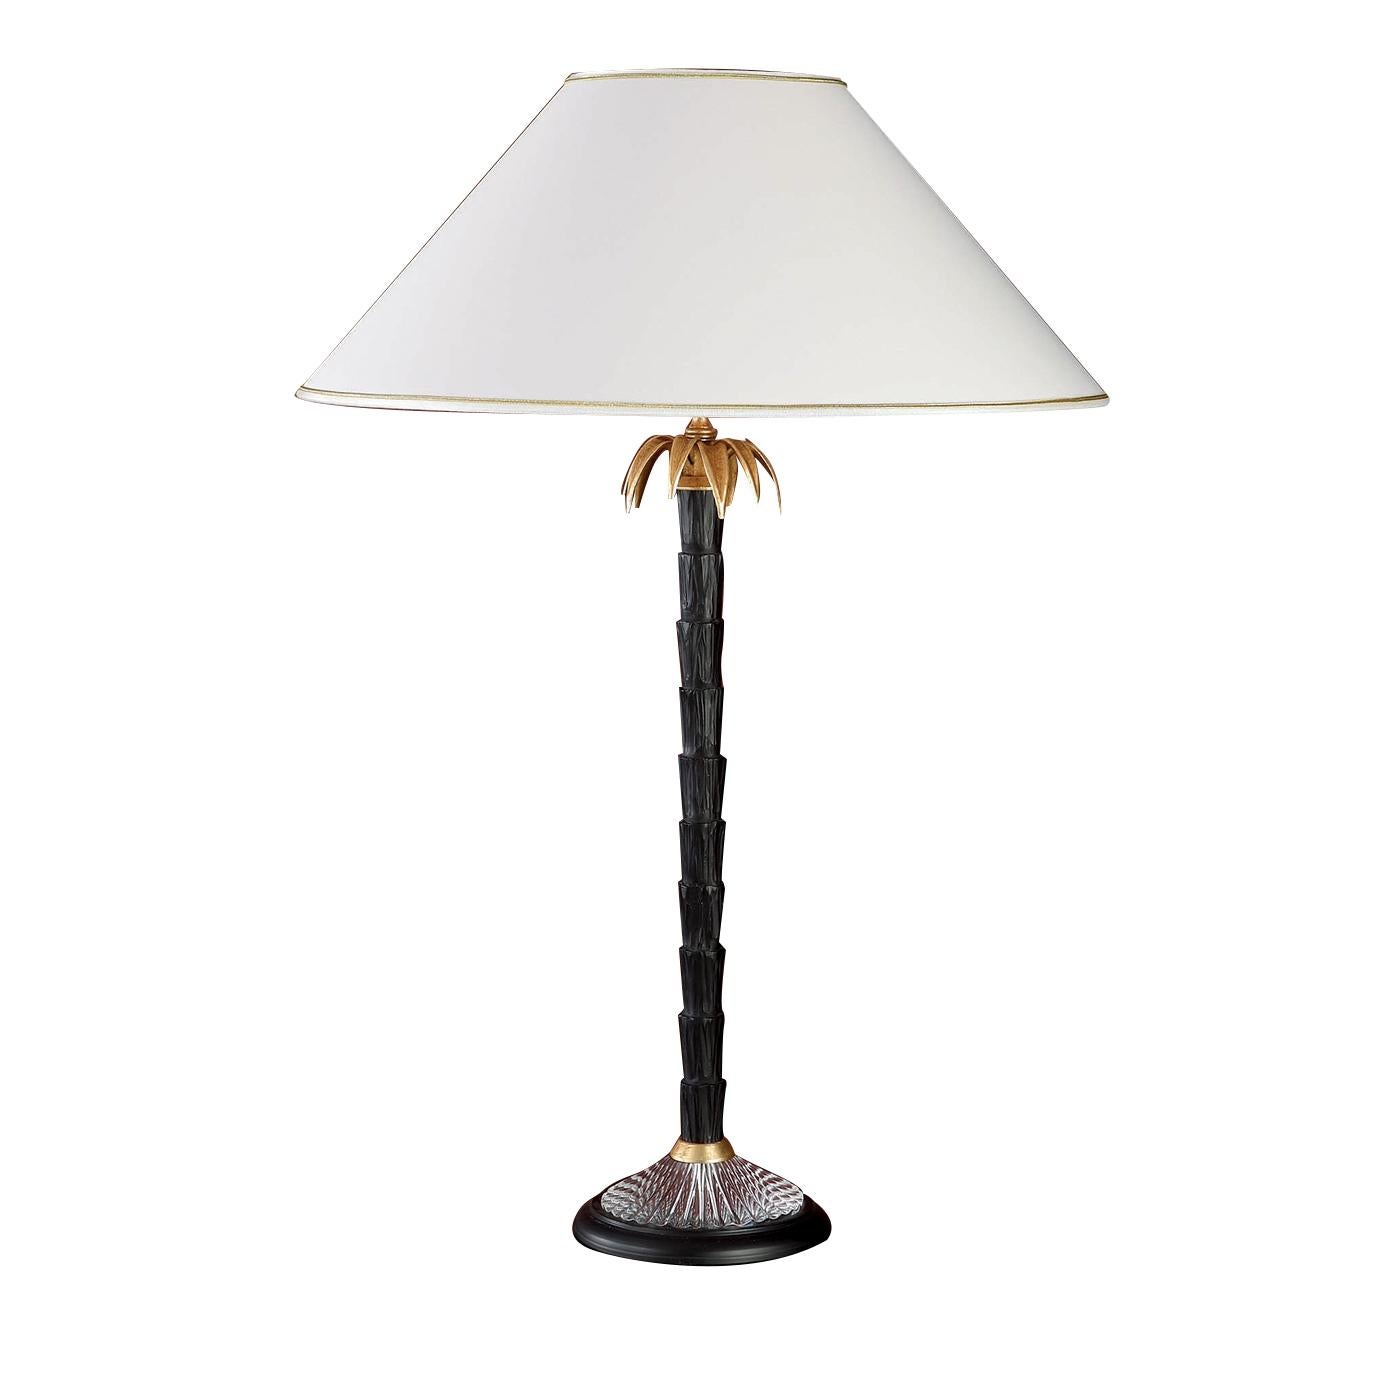 This exquisite table lamp will be a magnificent addition to a Classic or a contemporary decor. Its timeless design, combined with masterful craftsmanship, will add a luxurious accent to a study, living room, or entryway. The crystal base supports a